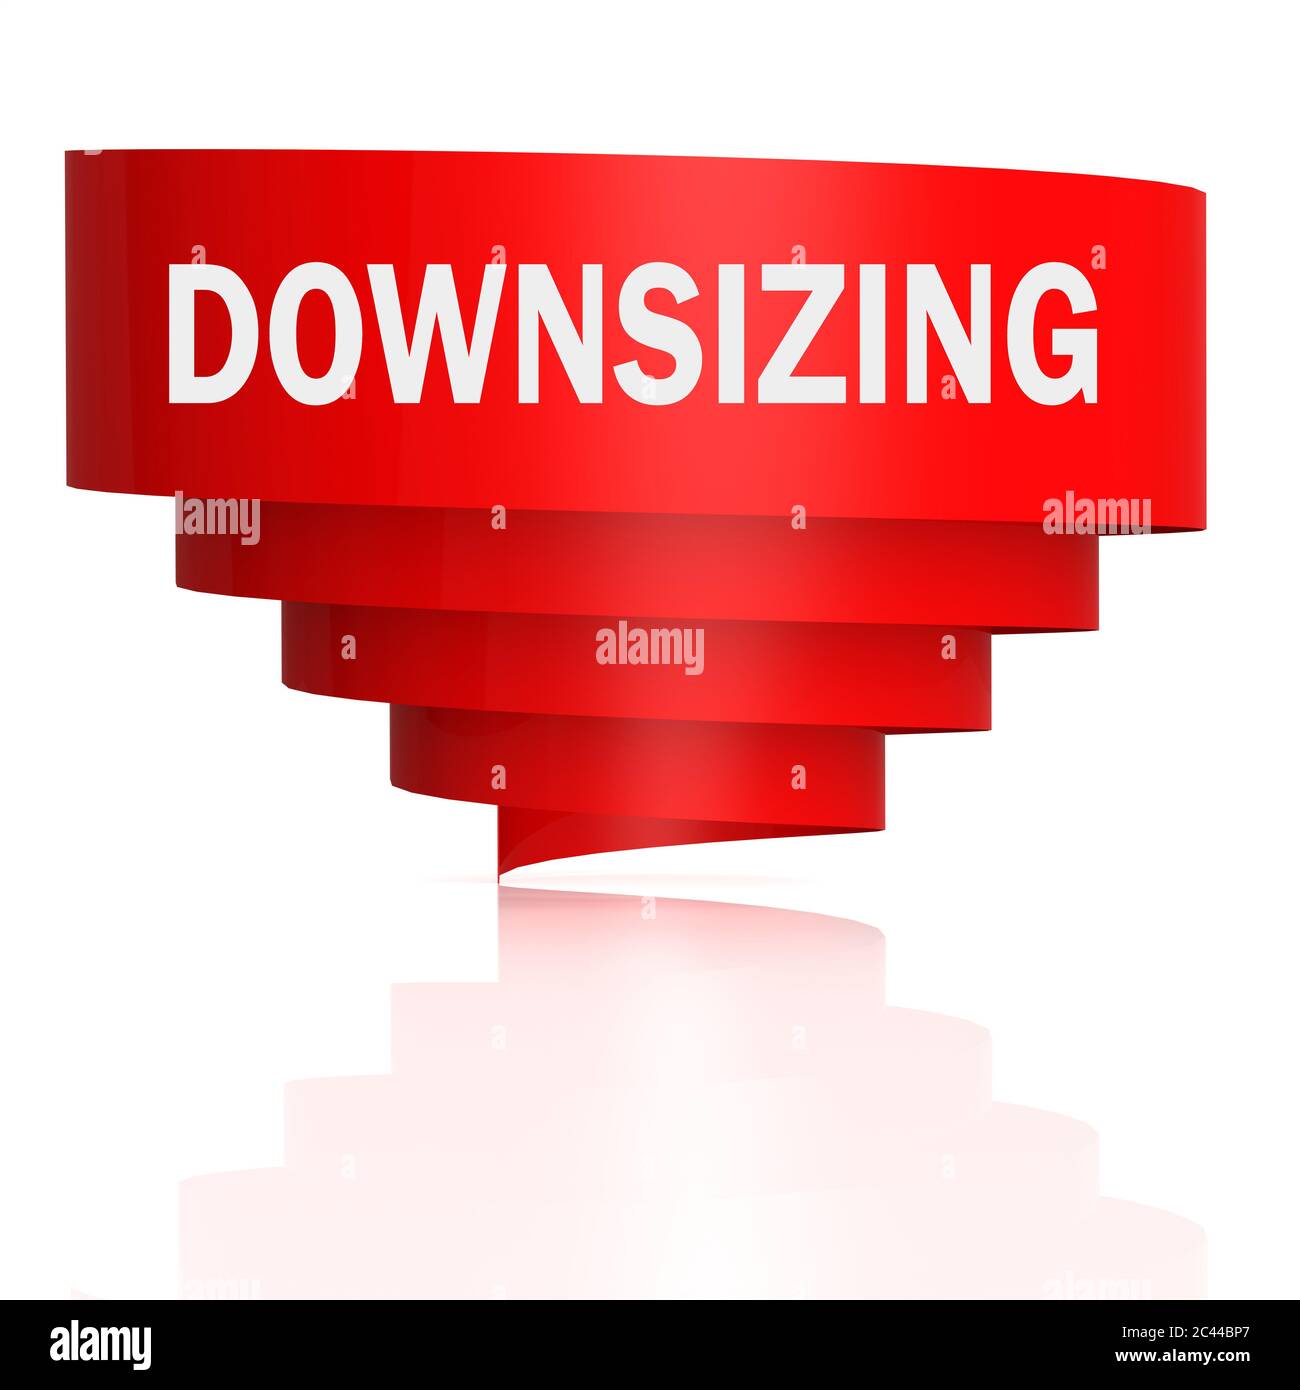 Downsizing word with red curve banner, 3D rendering Stock Photo